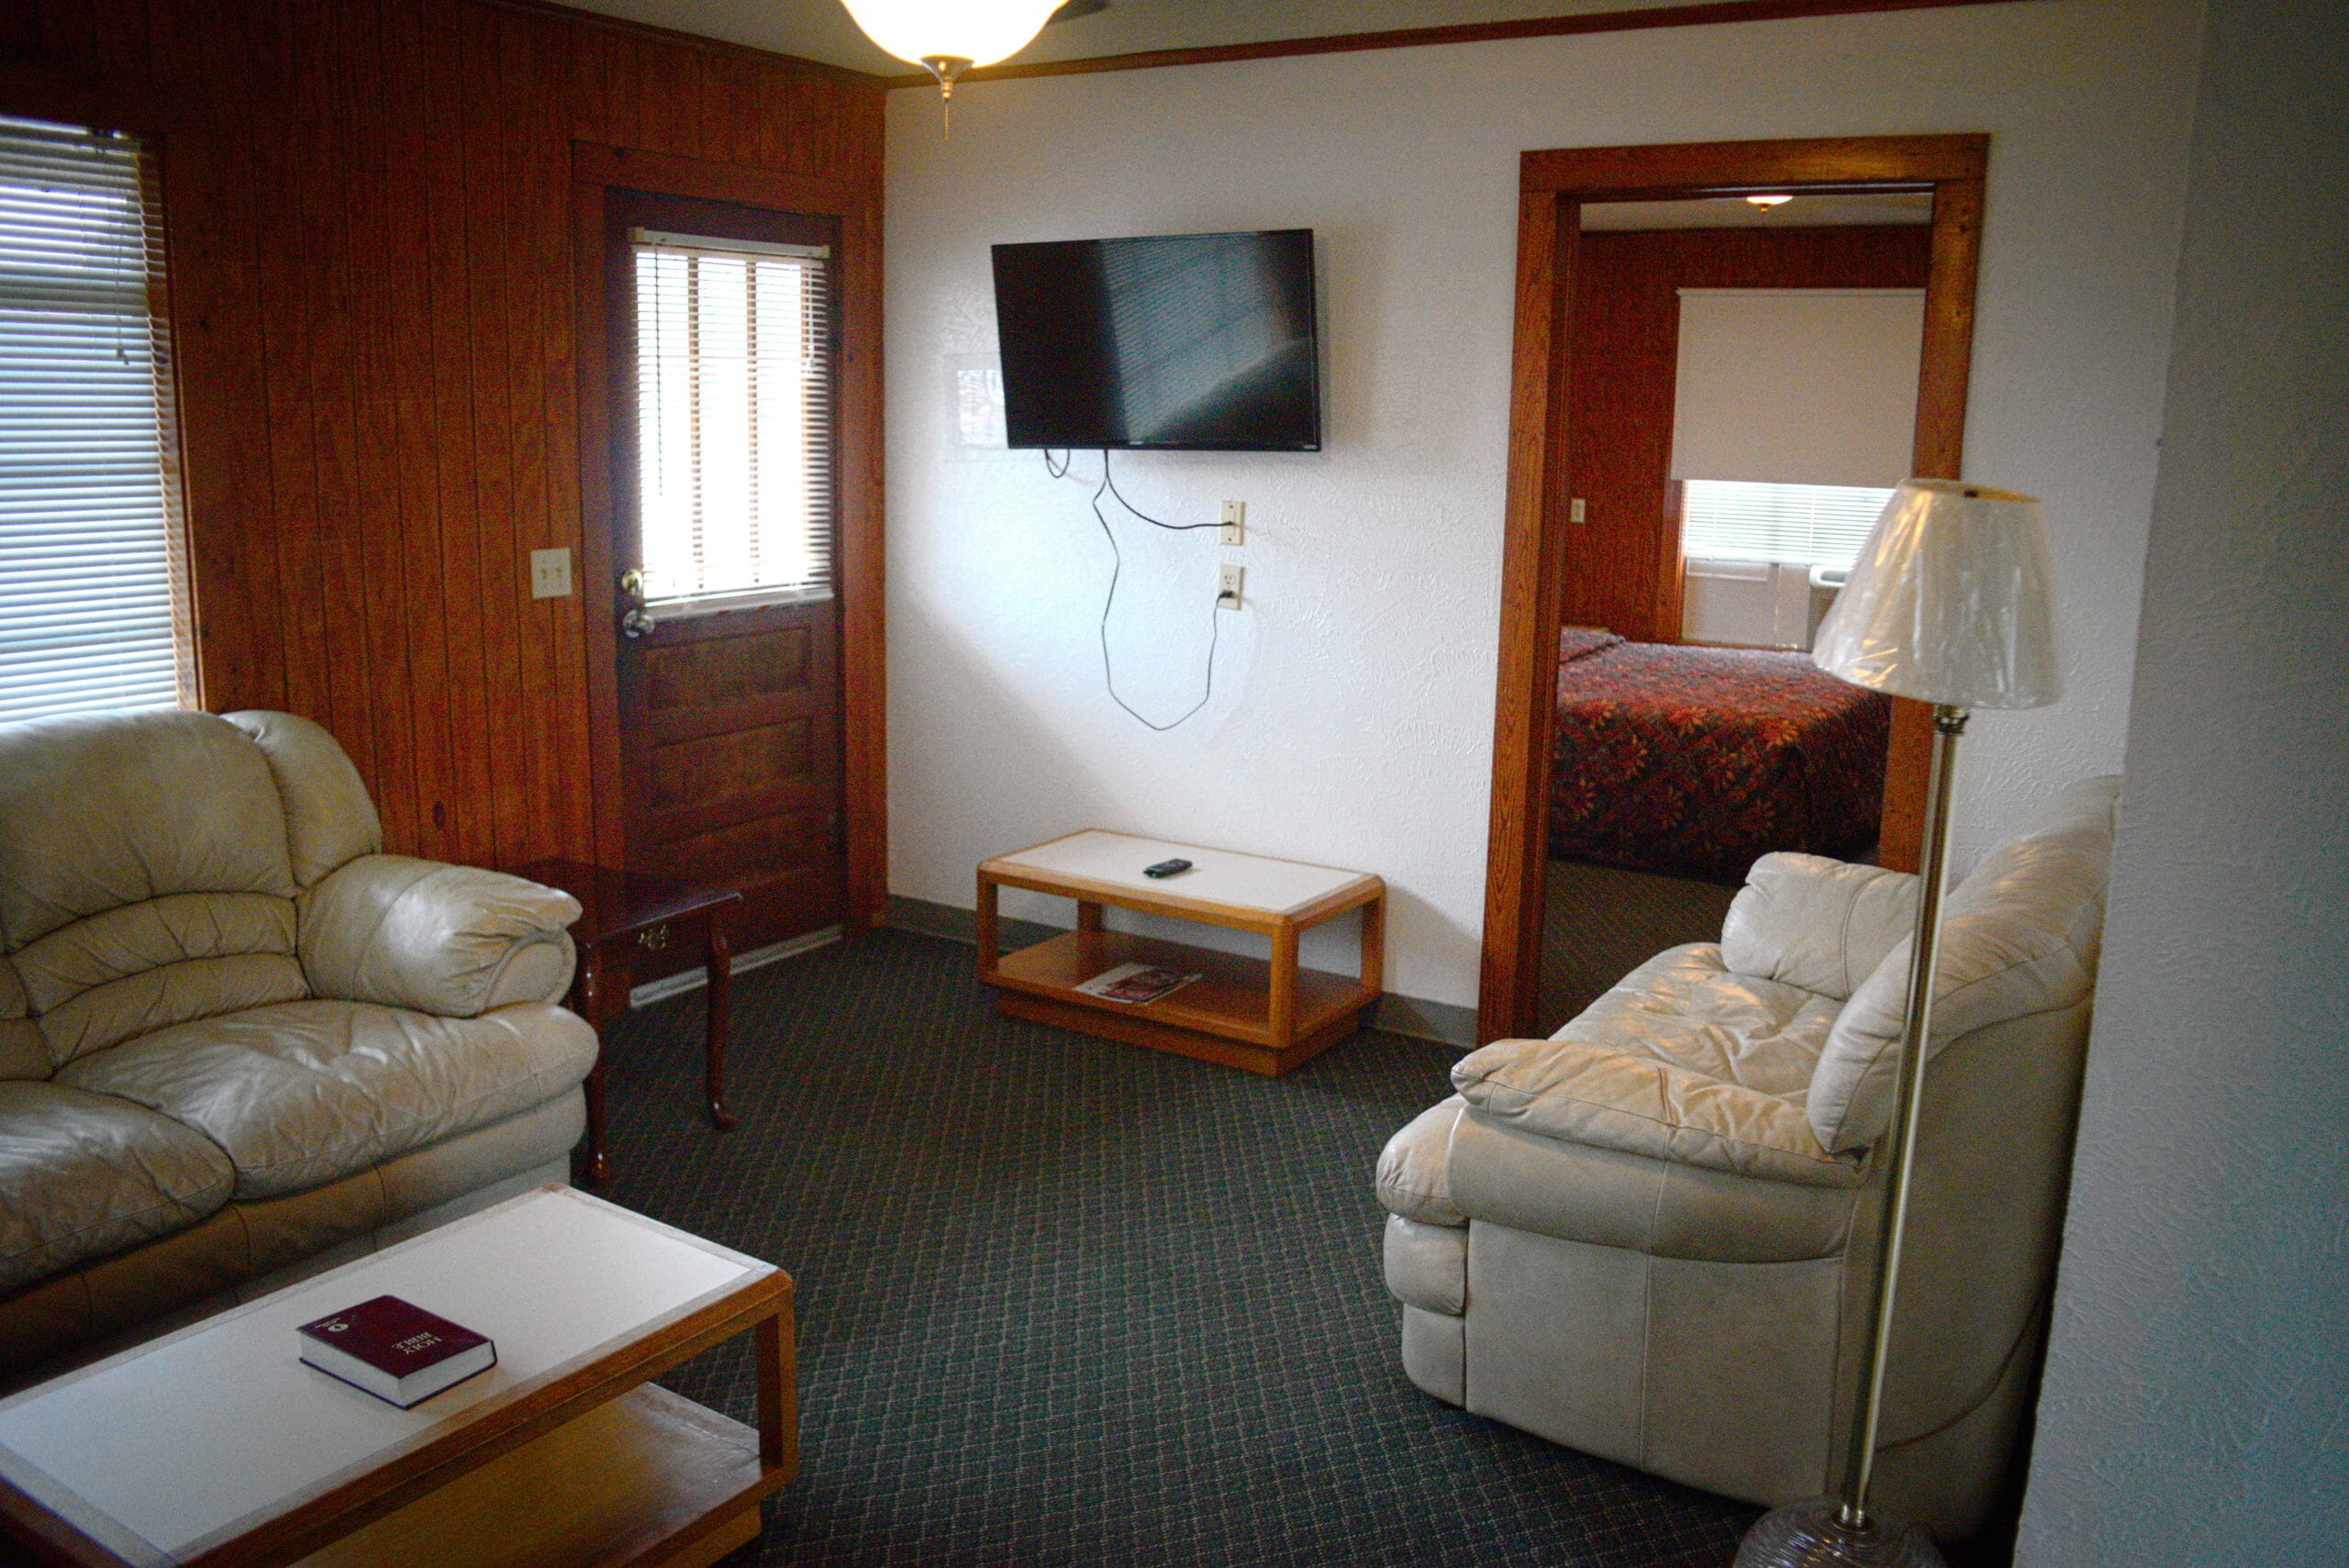 Accommodations at Little Andy's Sportsman's Lodge